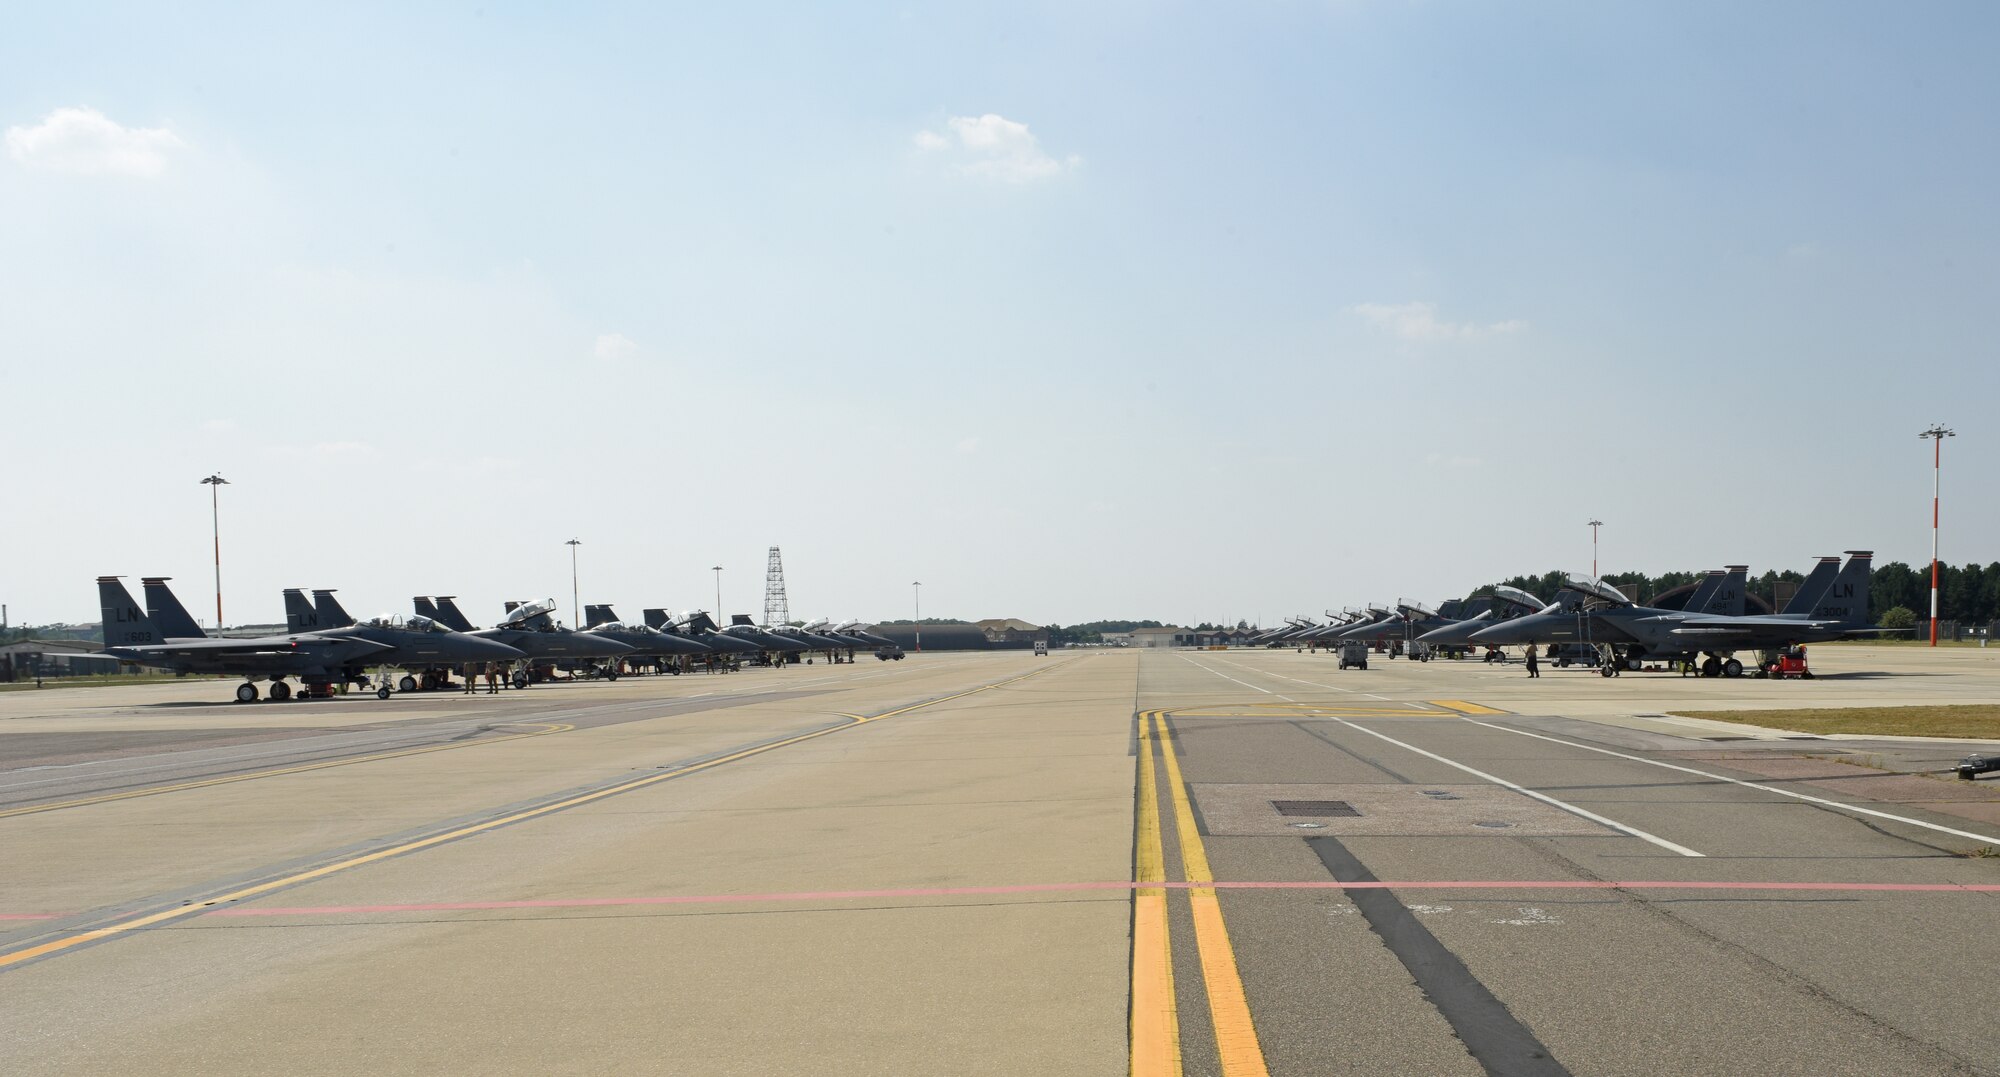 A fleet of F-15E Strike Eagles from the 492nd Fighter Squadron and the 494th FS utilizes the newly expanded ramp at Royal Air Force Lakenheath, England, Aug. 12, 2020. The ramp consolidates F-15E Strike Eagle operations for the two squadrons, shortens transit times and maintenance operations, and improves mission efficiency.  (U.S. Air Force photo by Airman 1st Class Rhonda Smith)